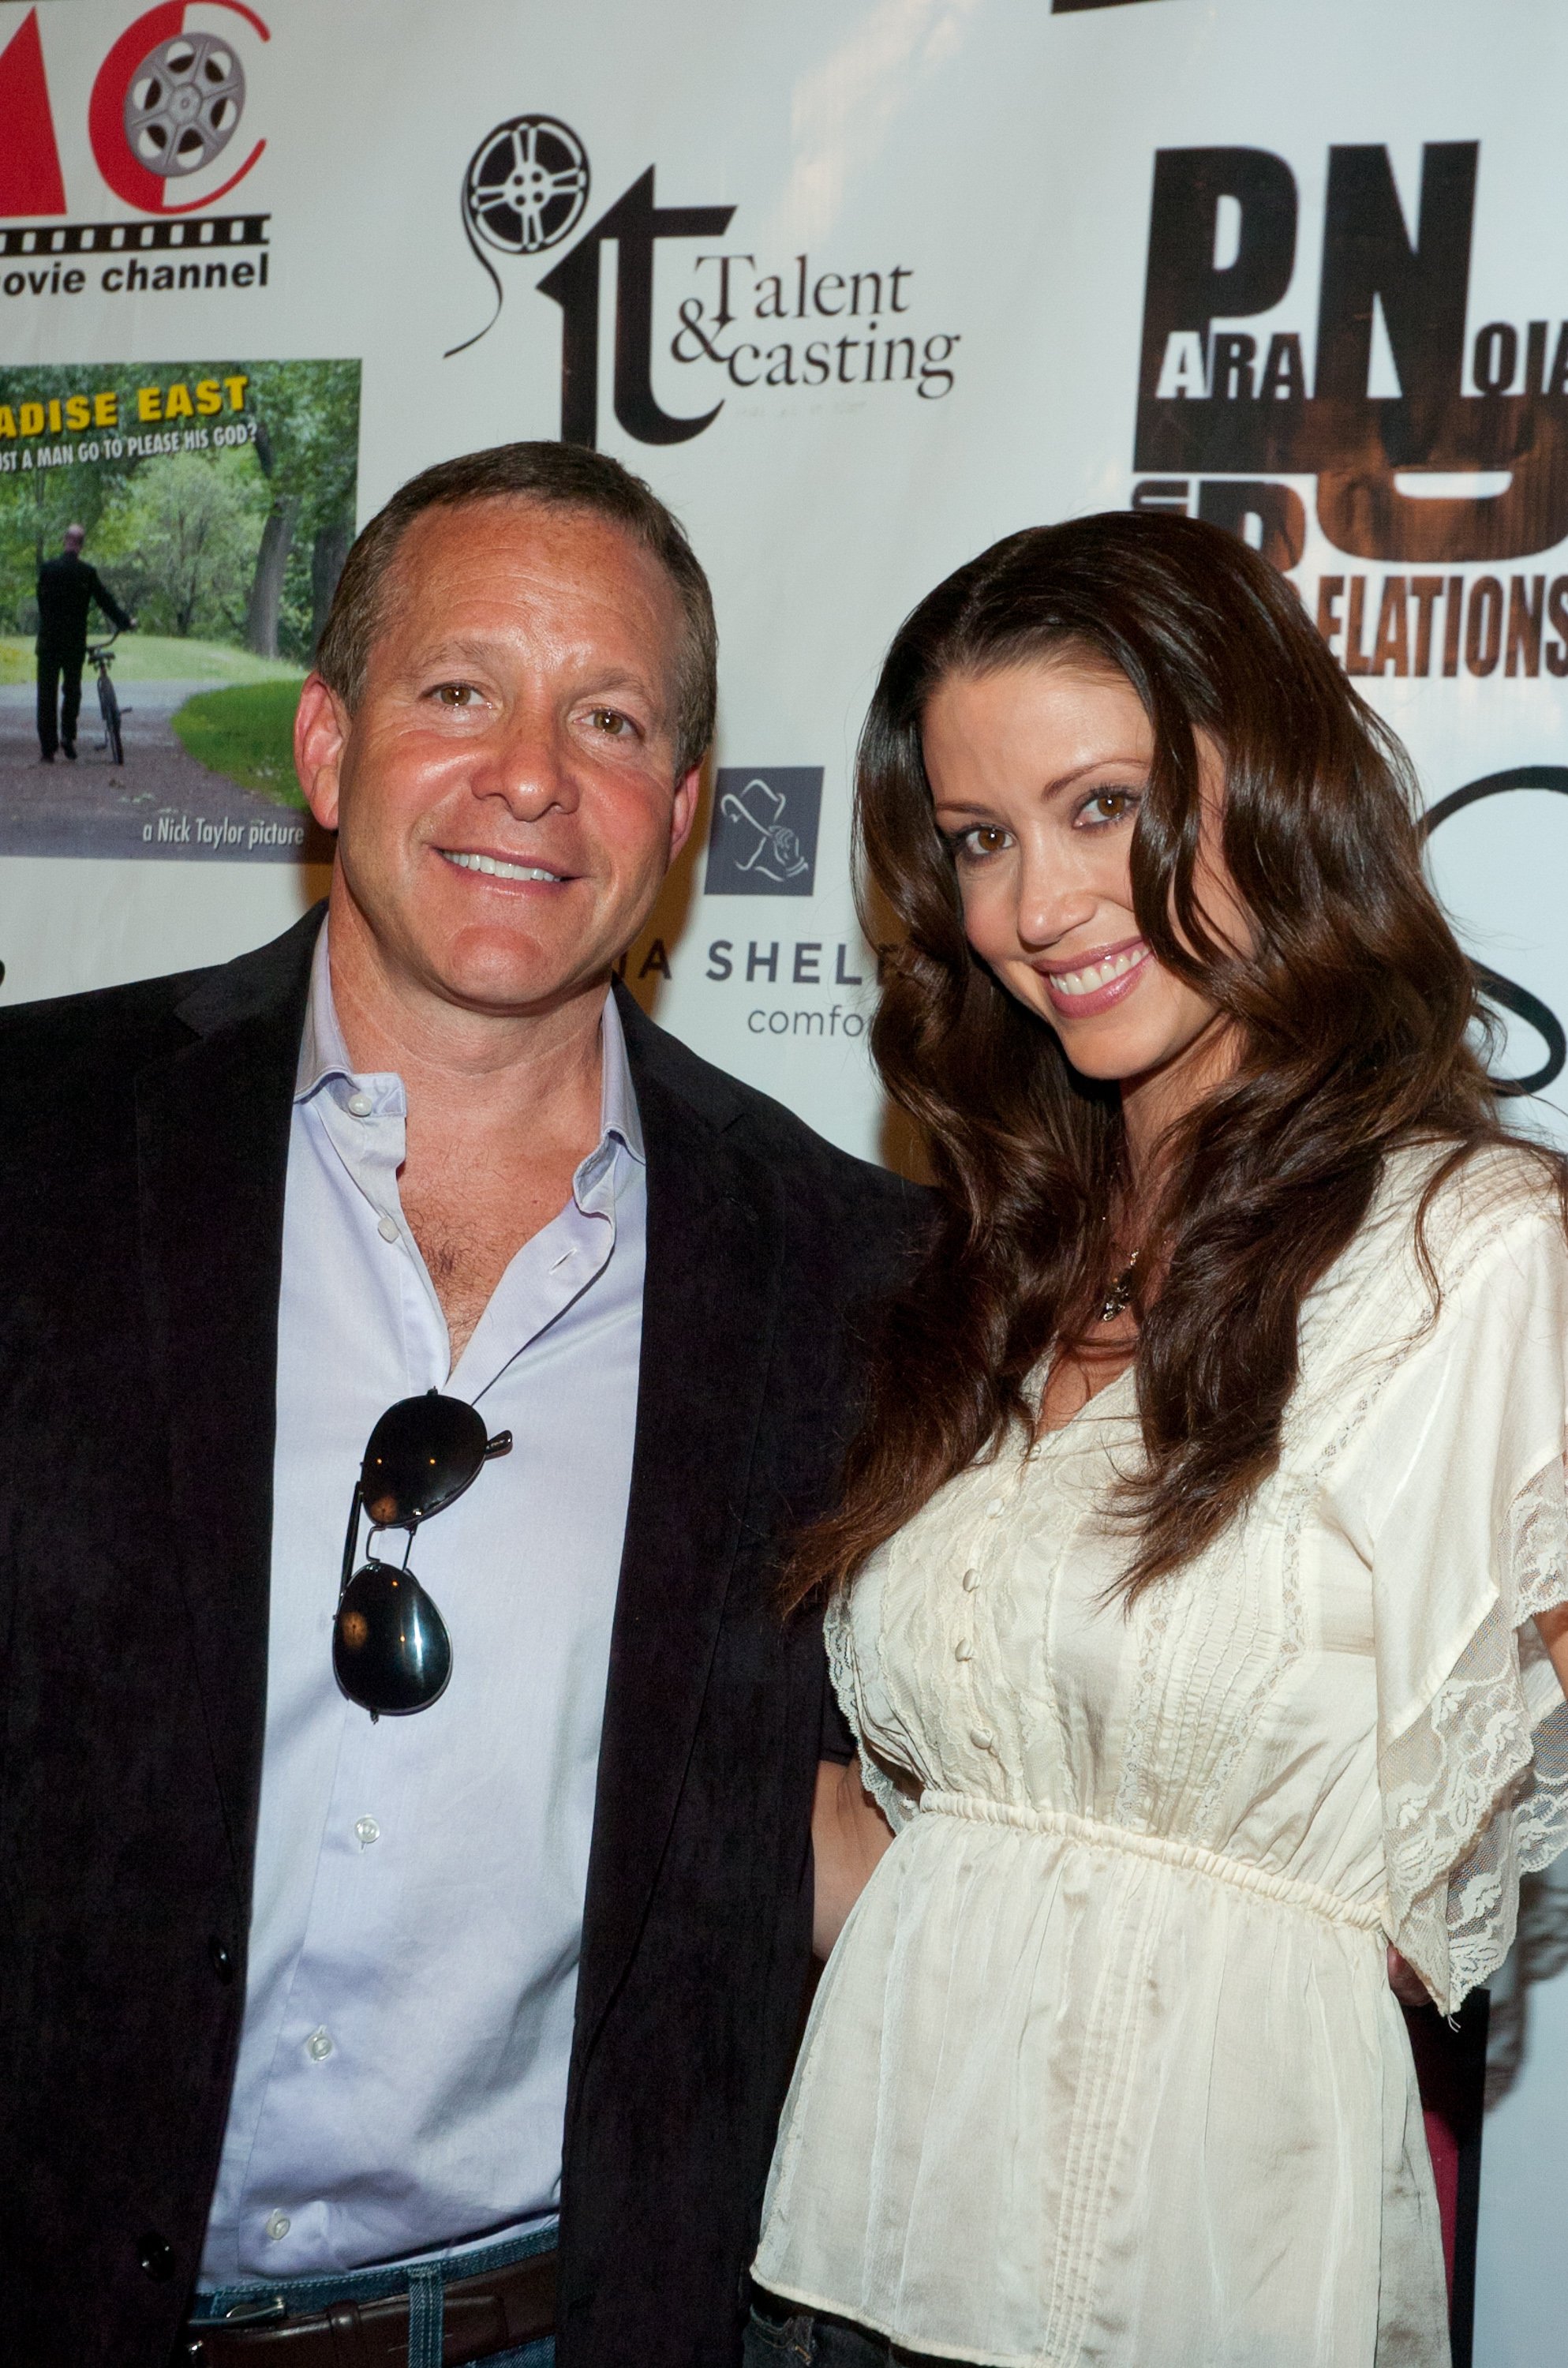 Actors Steve Guttenberg and Shannon Elizabeth at the premiere of "A Novel Romance" during the 2011 New York Independent Film Festival held at the Quad Cinema on May 5, 2011 in New York City. | Source: Getty Images